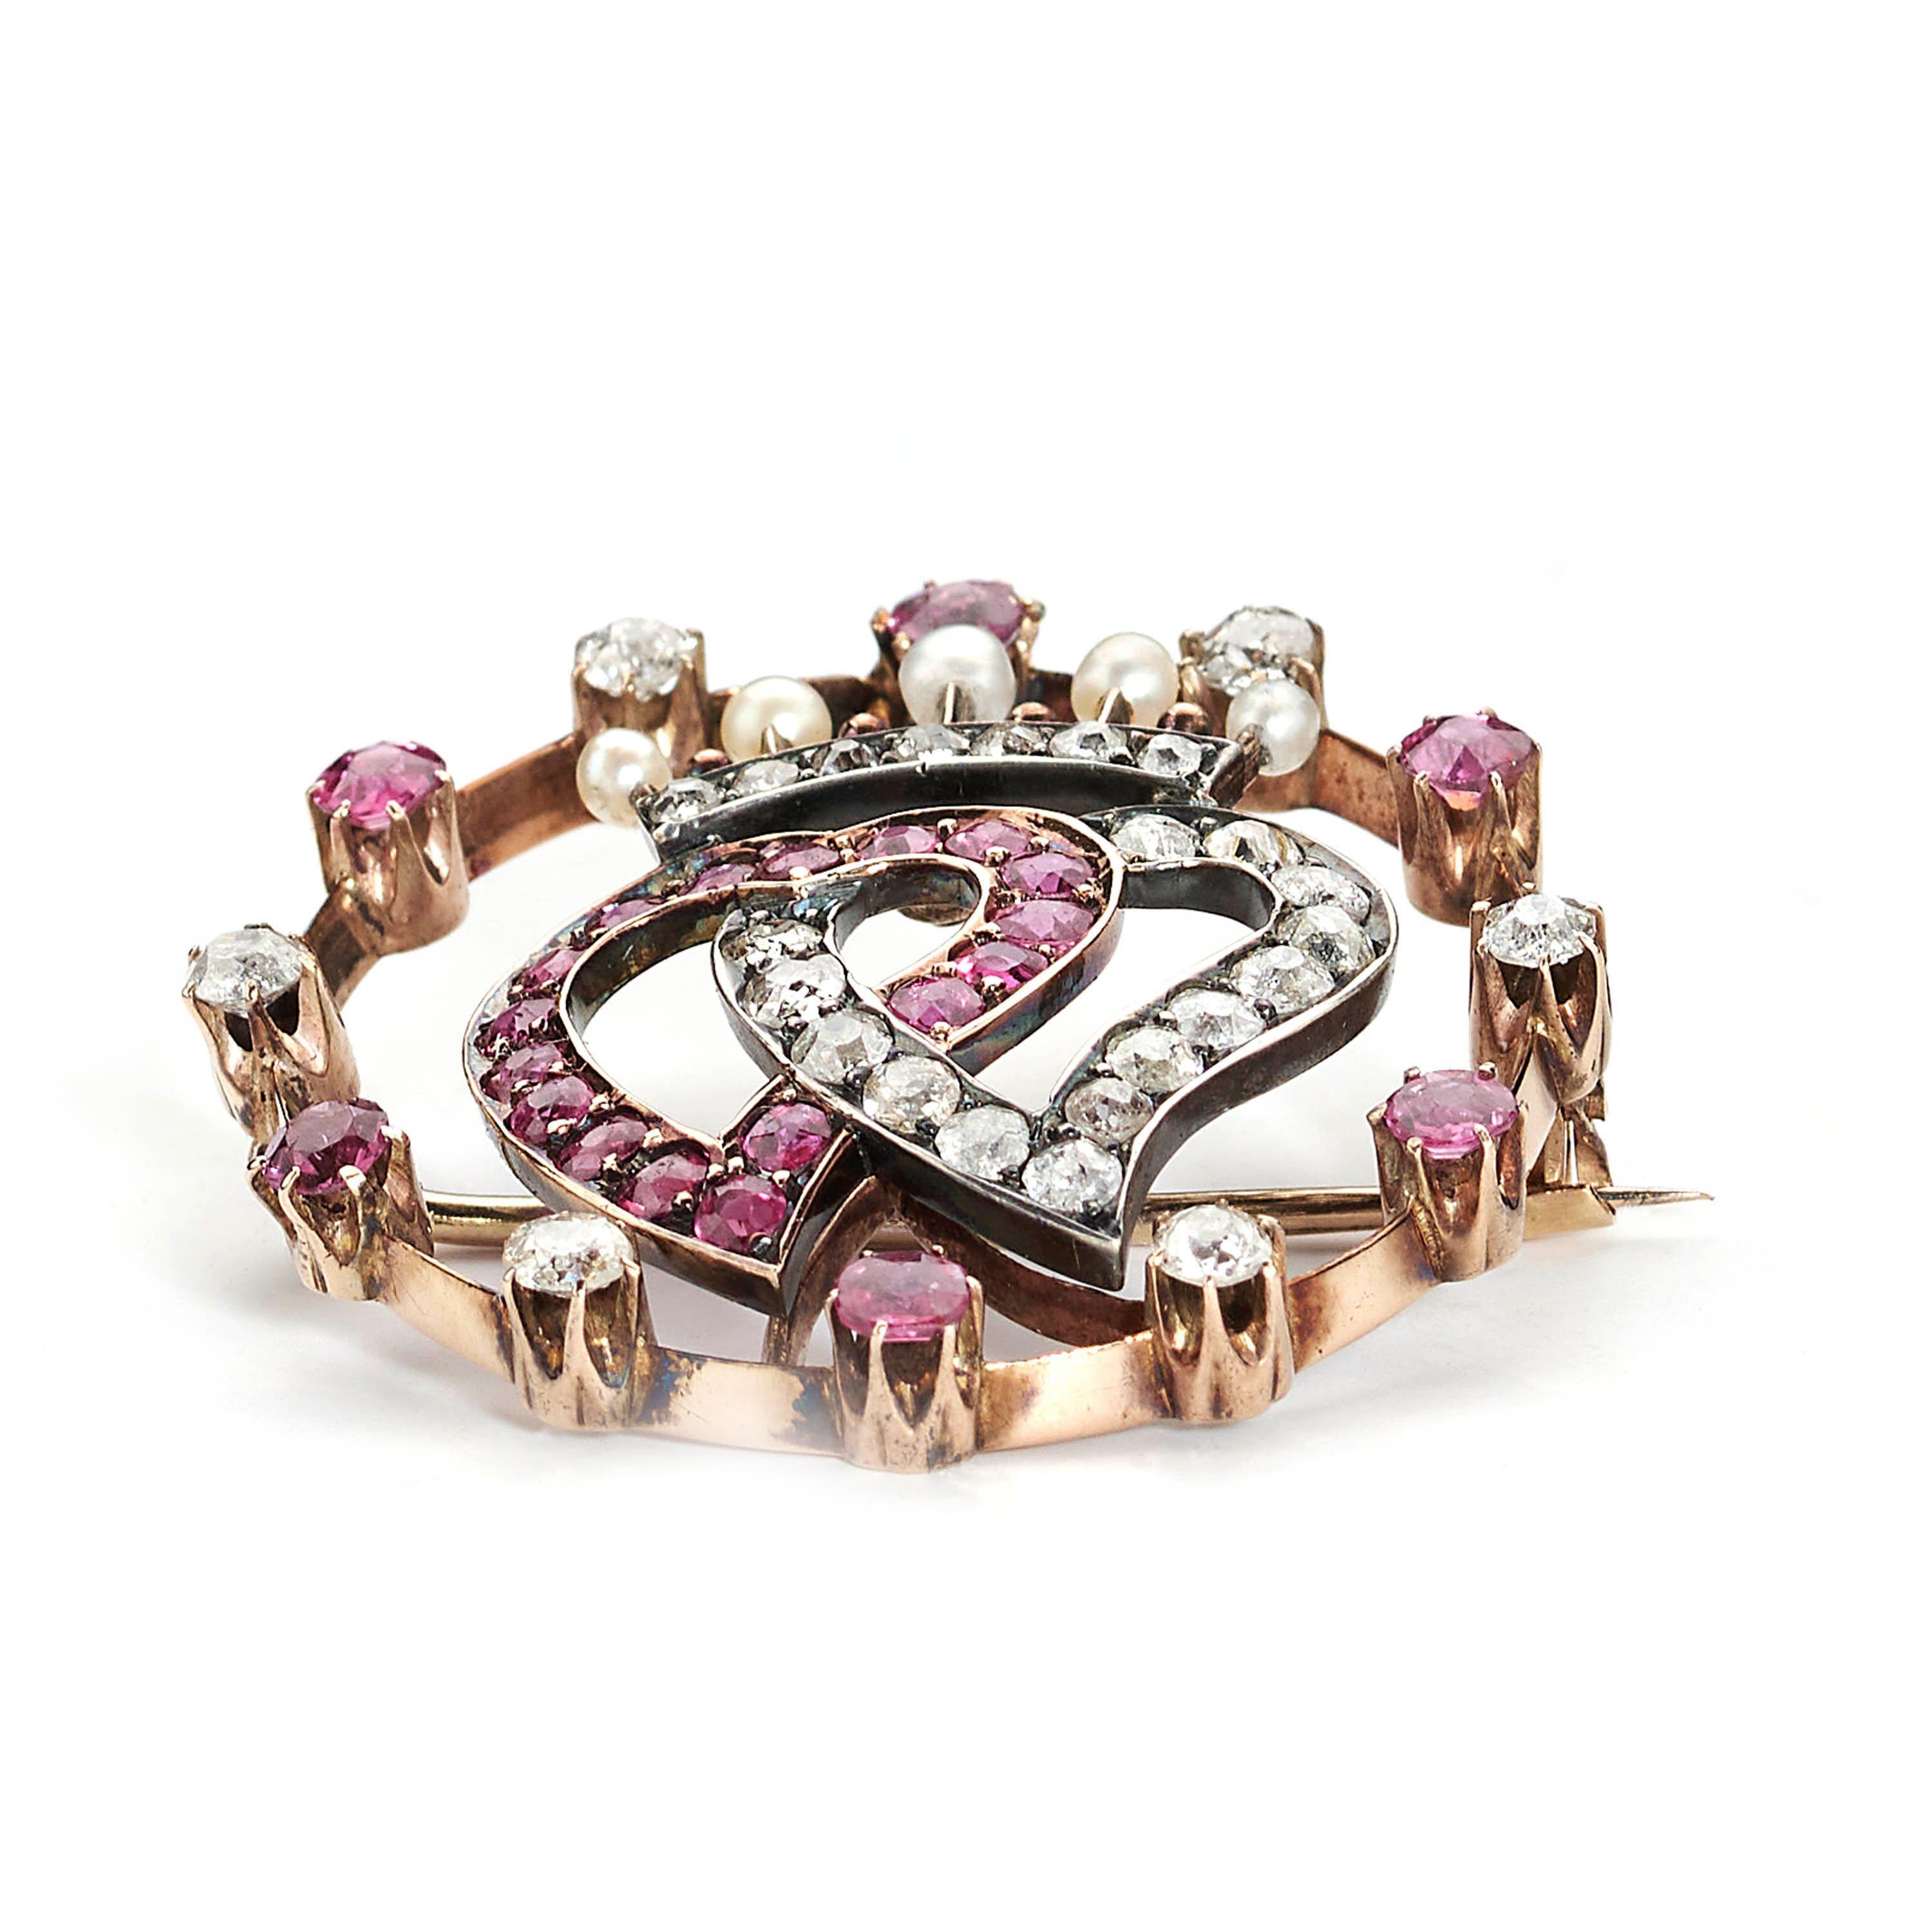 An early 20th century, Luckenbooth double witch's heart brooch, with one heart set with Burma rubies and the other set with old-cut diamonds, in grain settings, surmounted with a coronet, set with three, natural seed pearls, above a row of old-cut